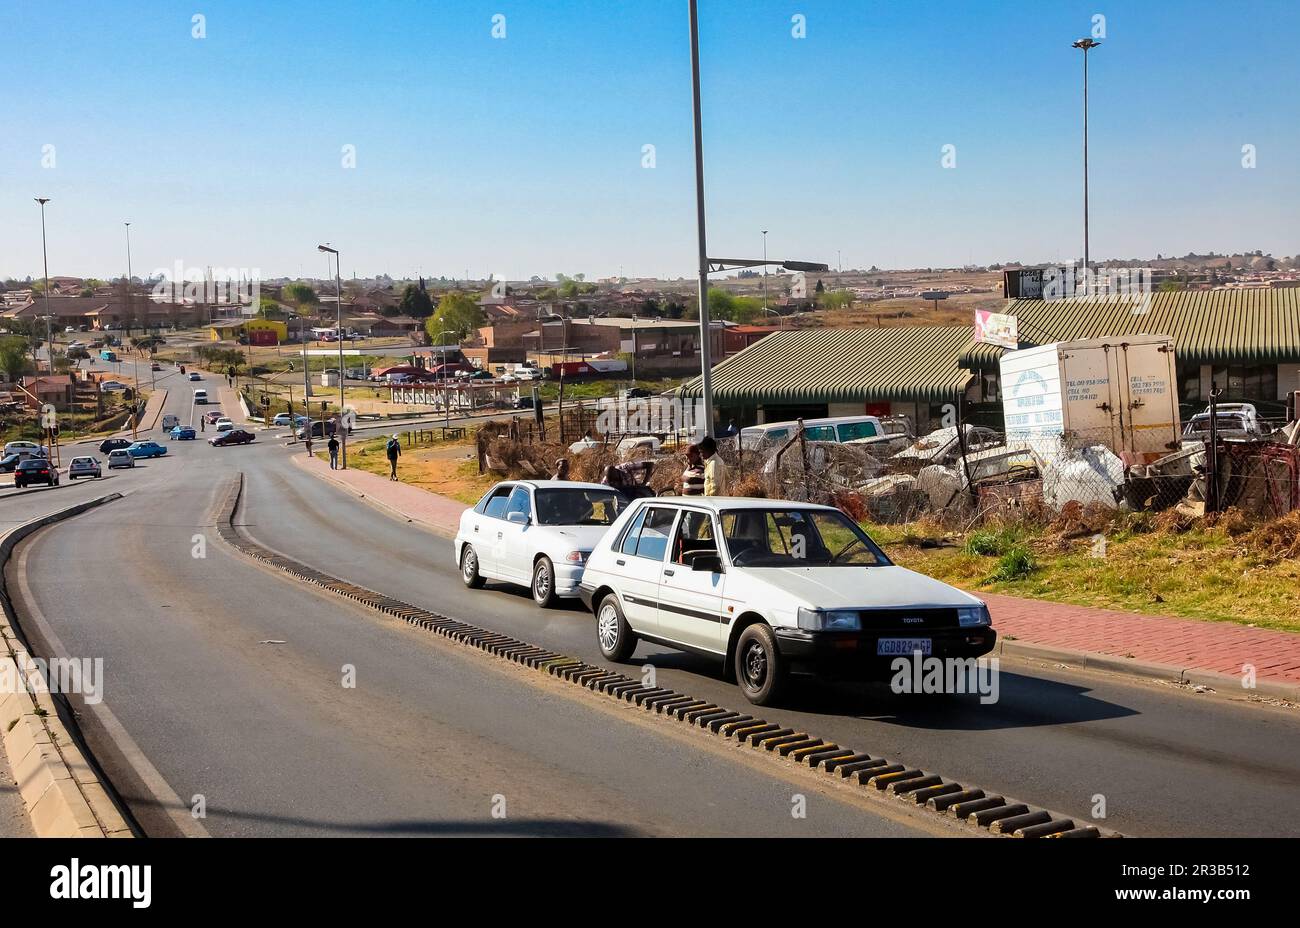 People and streets in urban Soweto South Africa Stock Photo